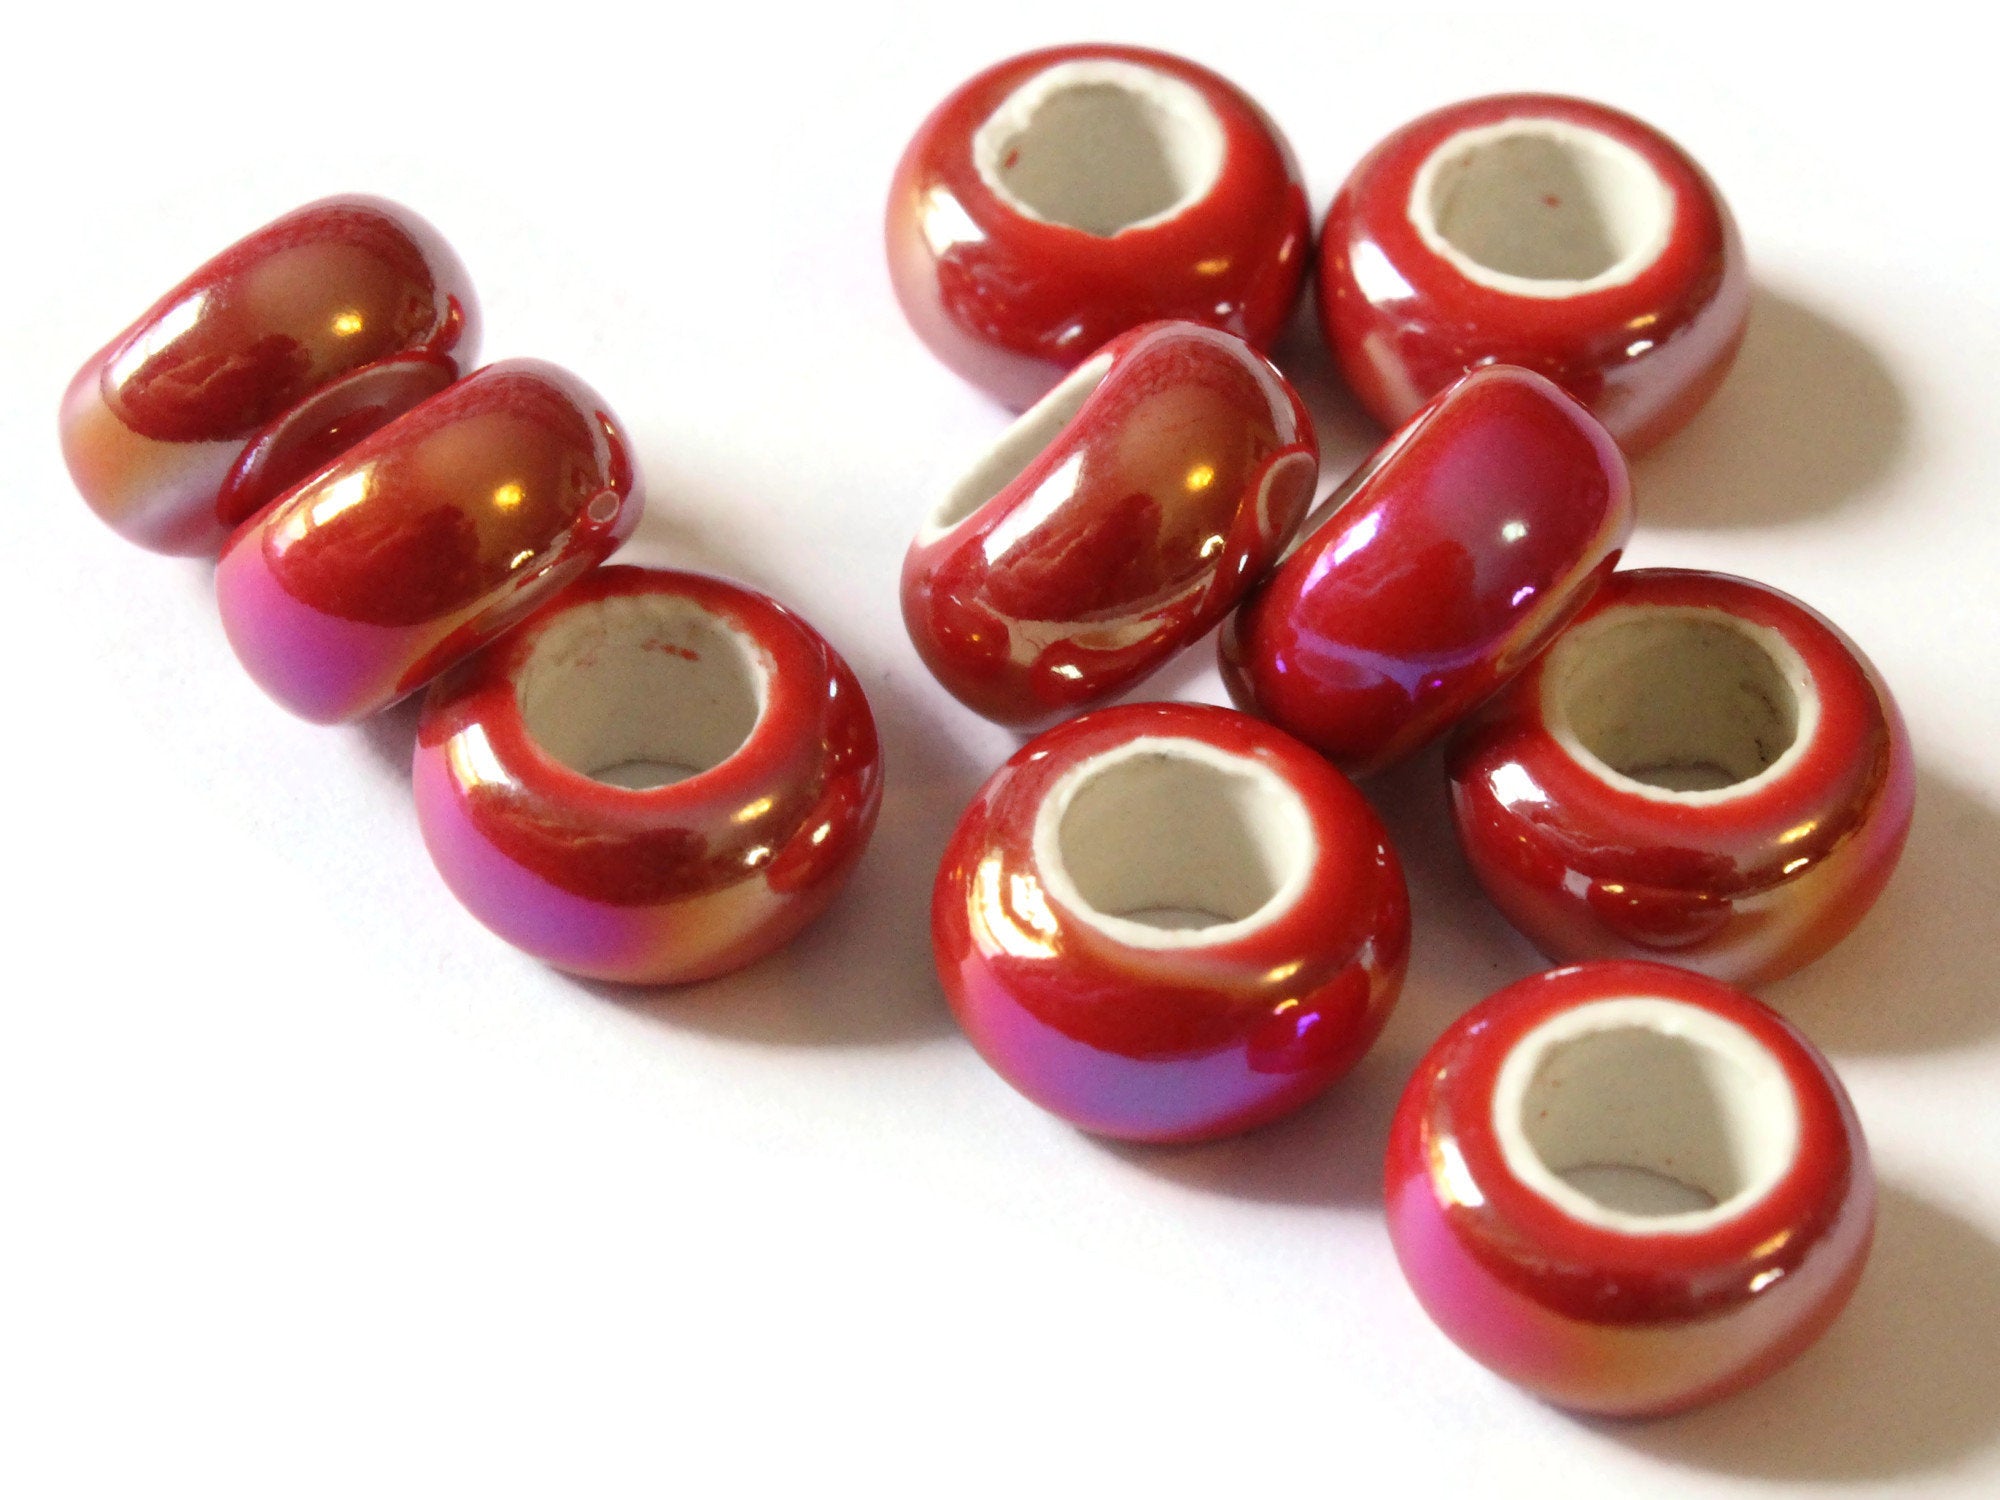 10 13mm Red Porcelain Rondelle Beads - Large Hole Beads by Smileyboy Beads | Michaels